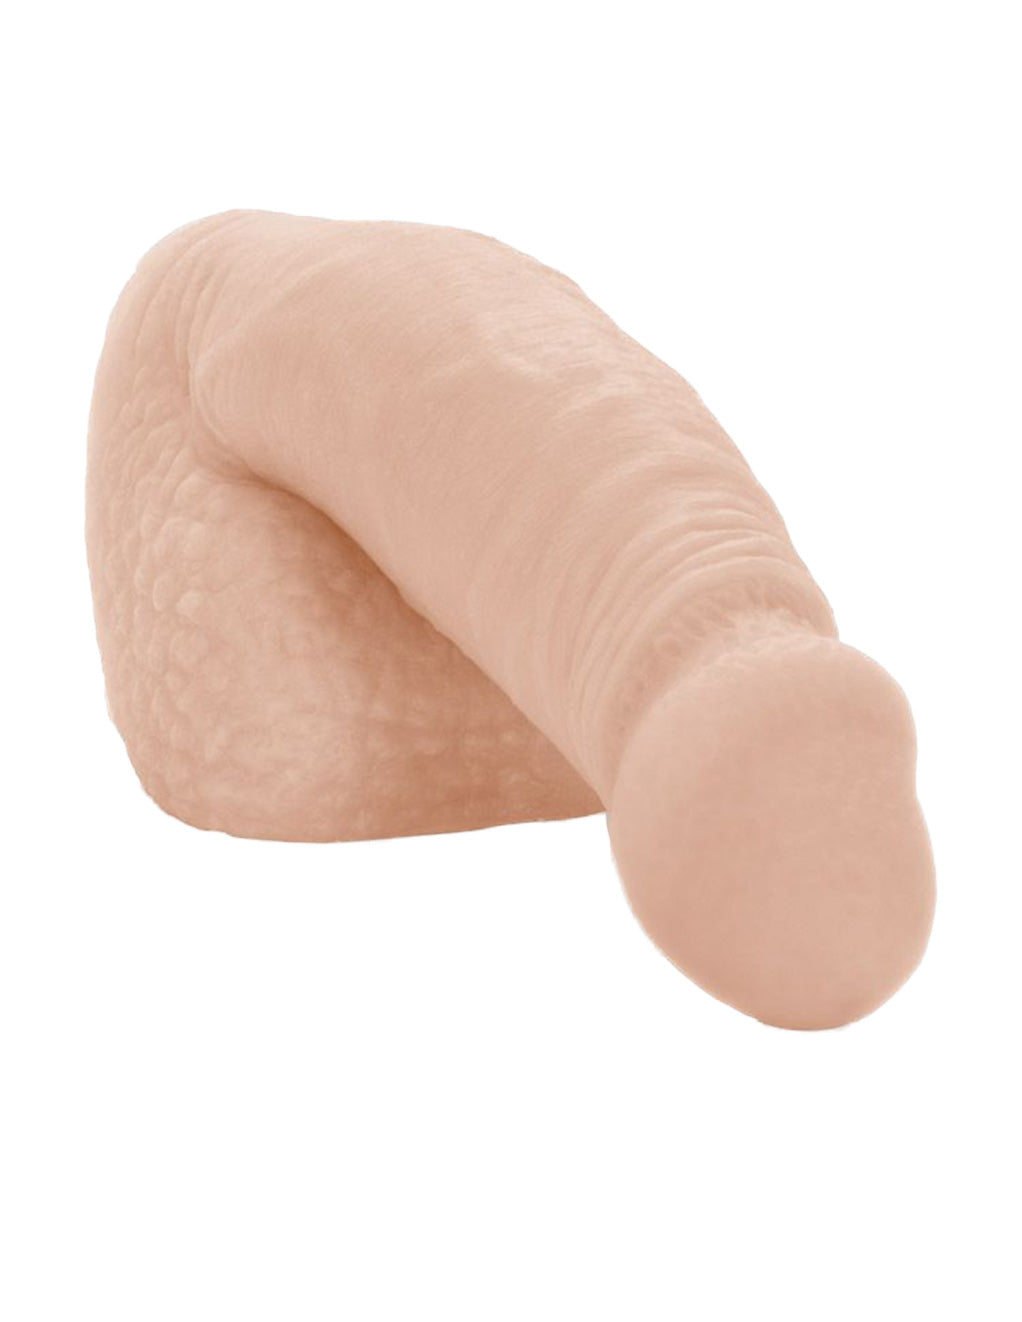 CalExotics Packer Gear 5 inch Packing Penis Ivory